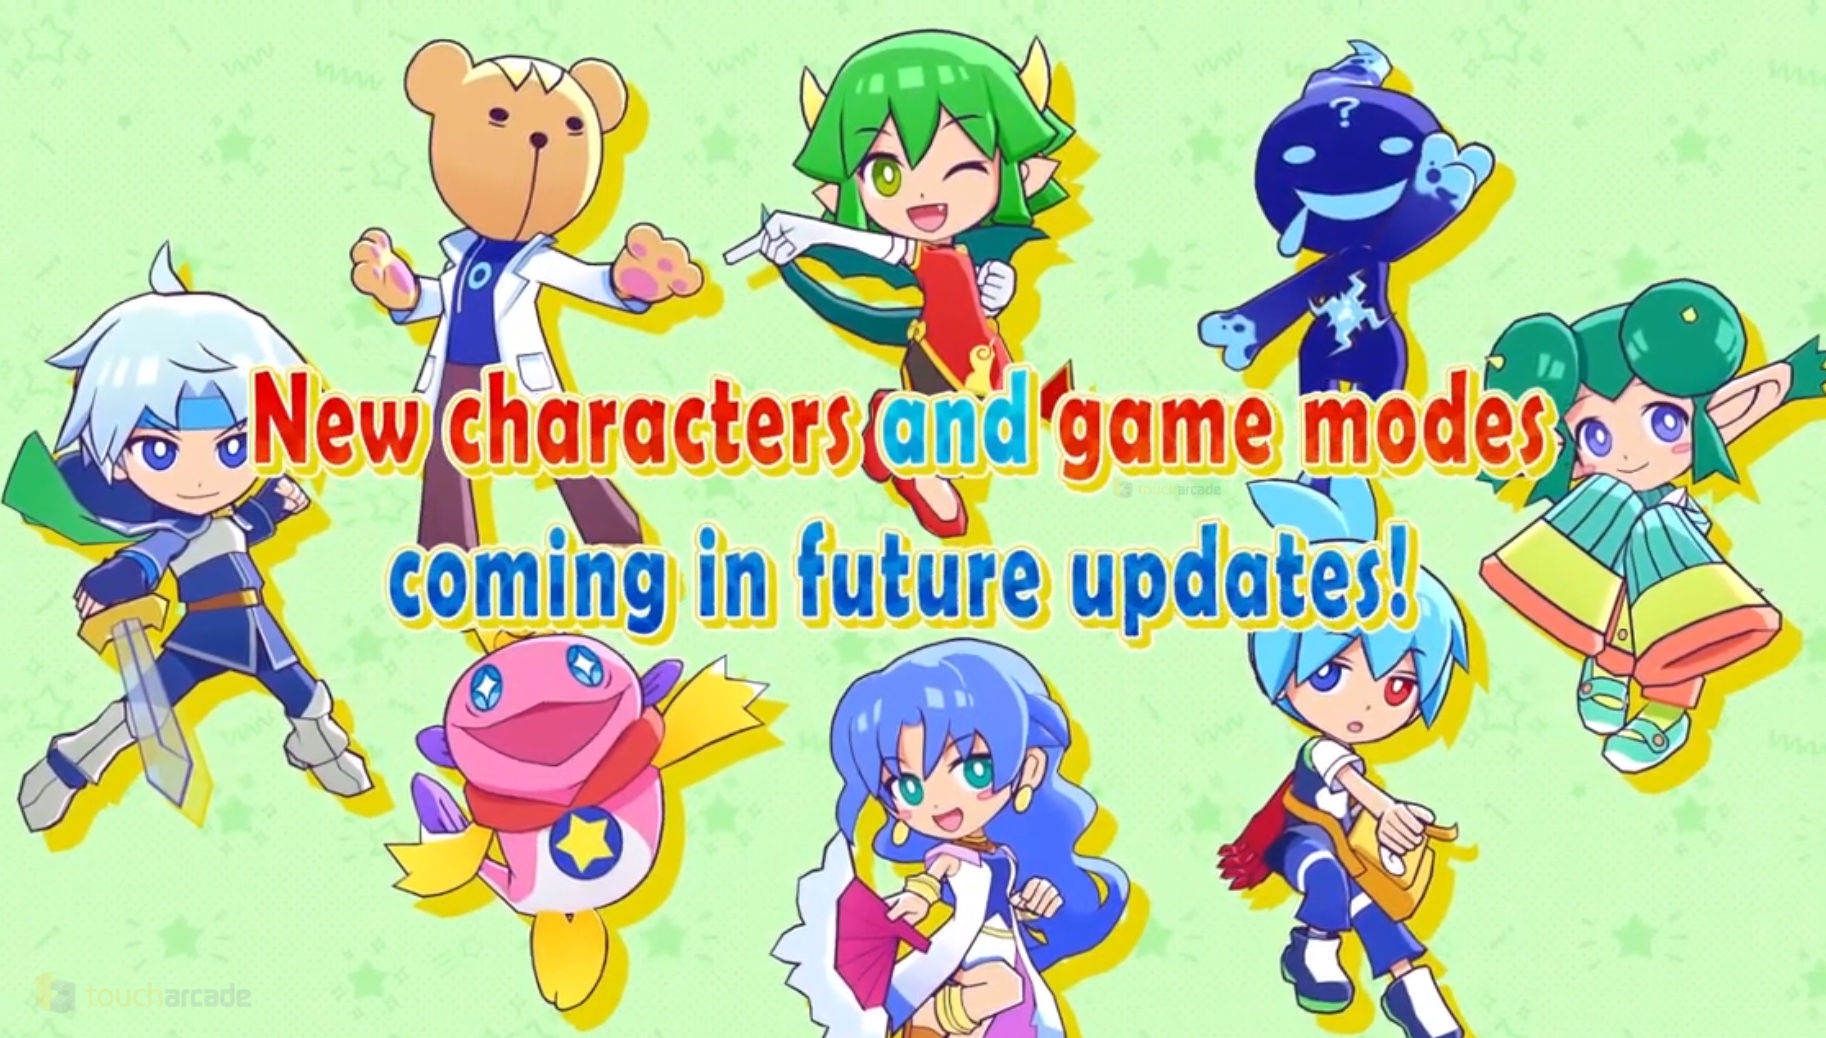 New ‘Puyo Puyo Puzzle Pop’ Gameplay Trailer Showcases Game Modes and Teases New Characters Coming in Updates